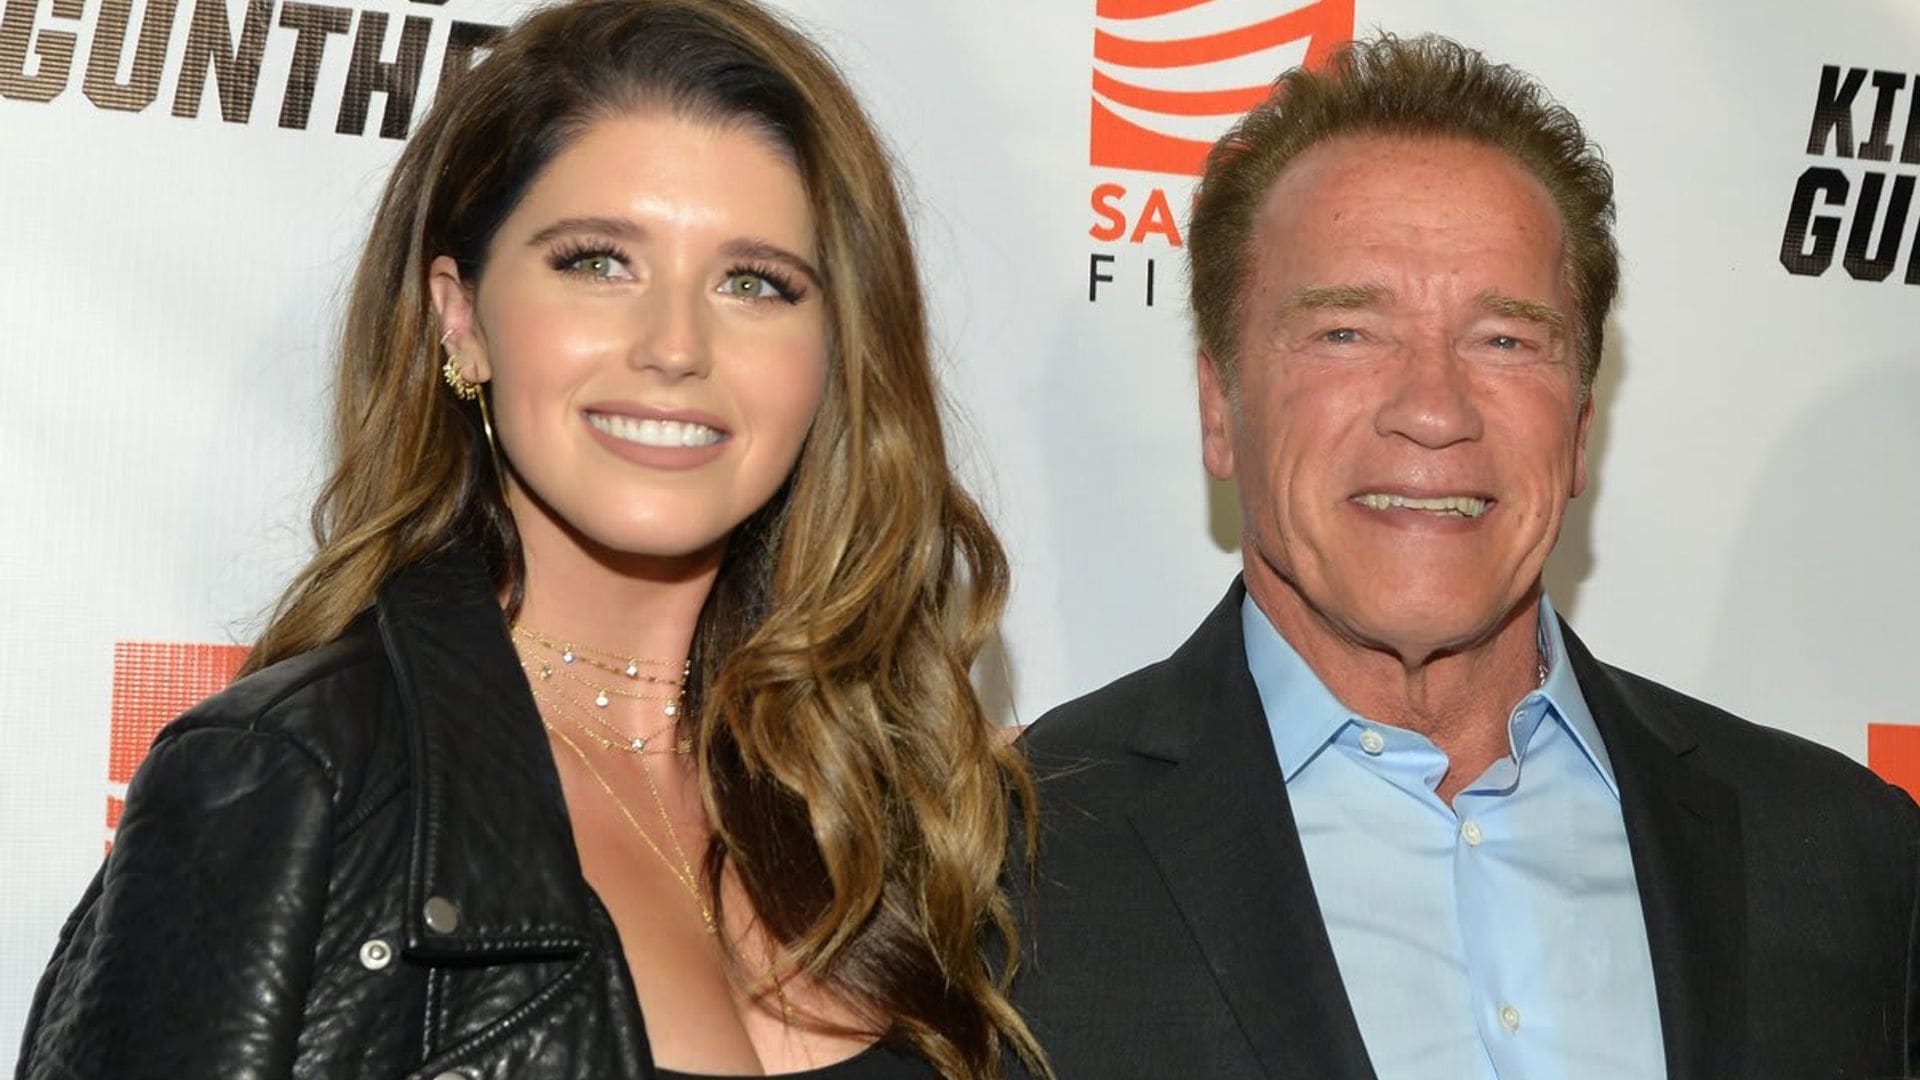 Arnold Schwarzenegger jokes why it’s ‘great to be a grandfather’ to his daughter’s ‘beautiful baby girl’